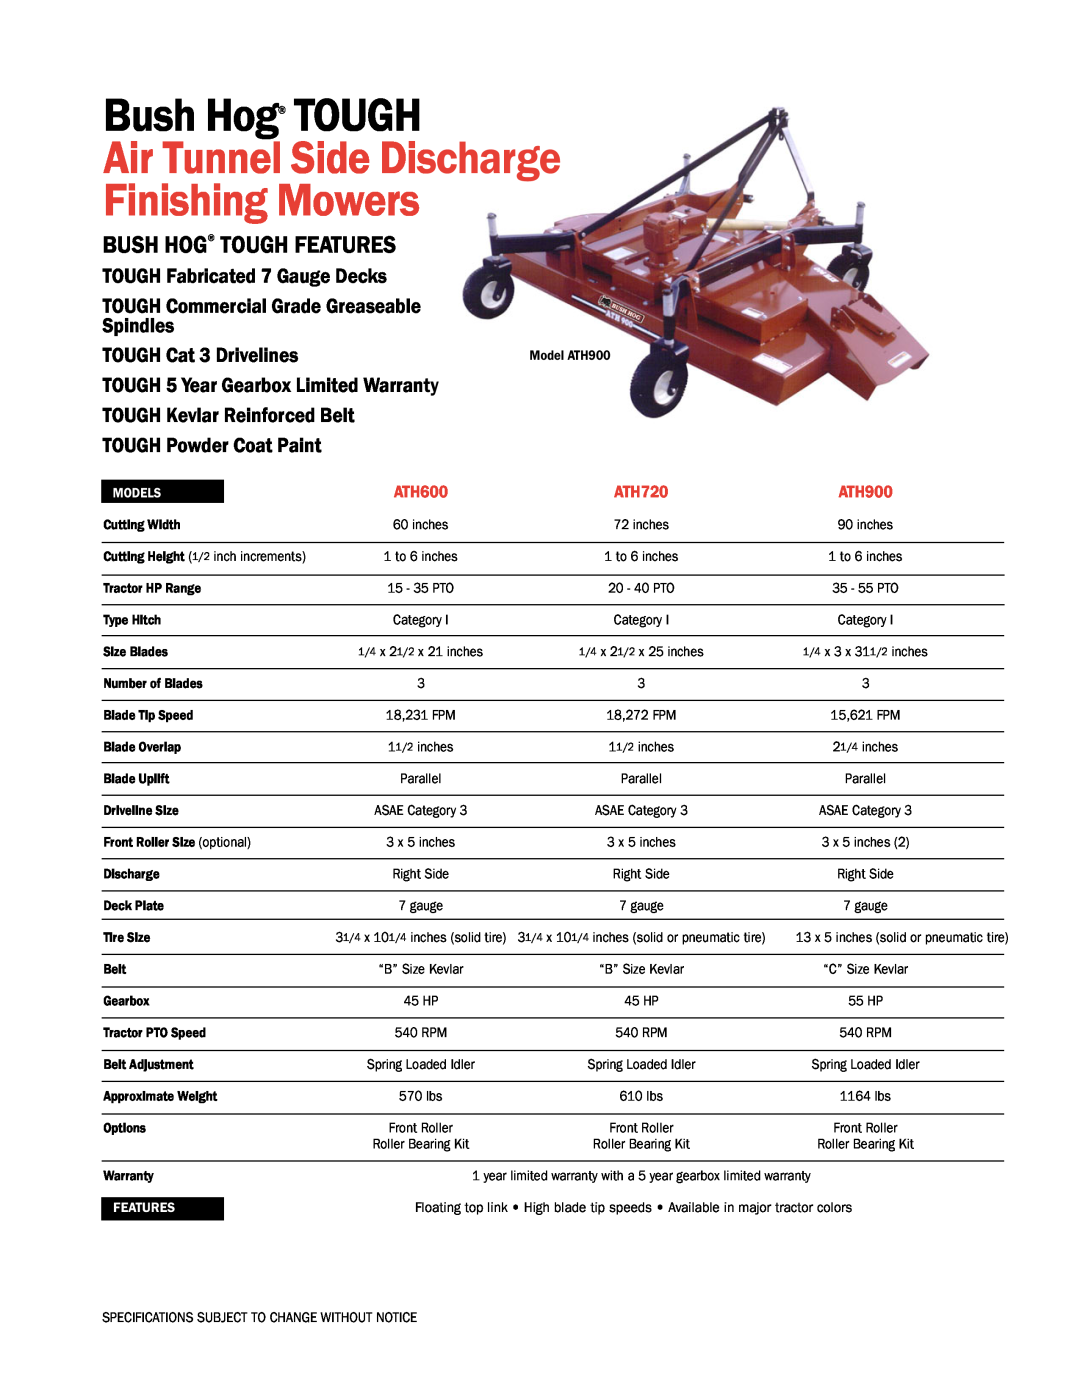 Bush Hog ATH720 specifications Air Tunnel Side Discharge Finishing Mowers, Bush Hog TOUGH Features, ATH600, ATH900 